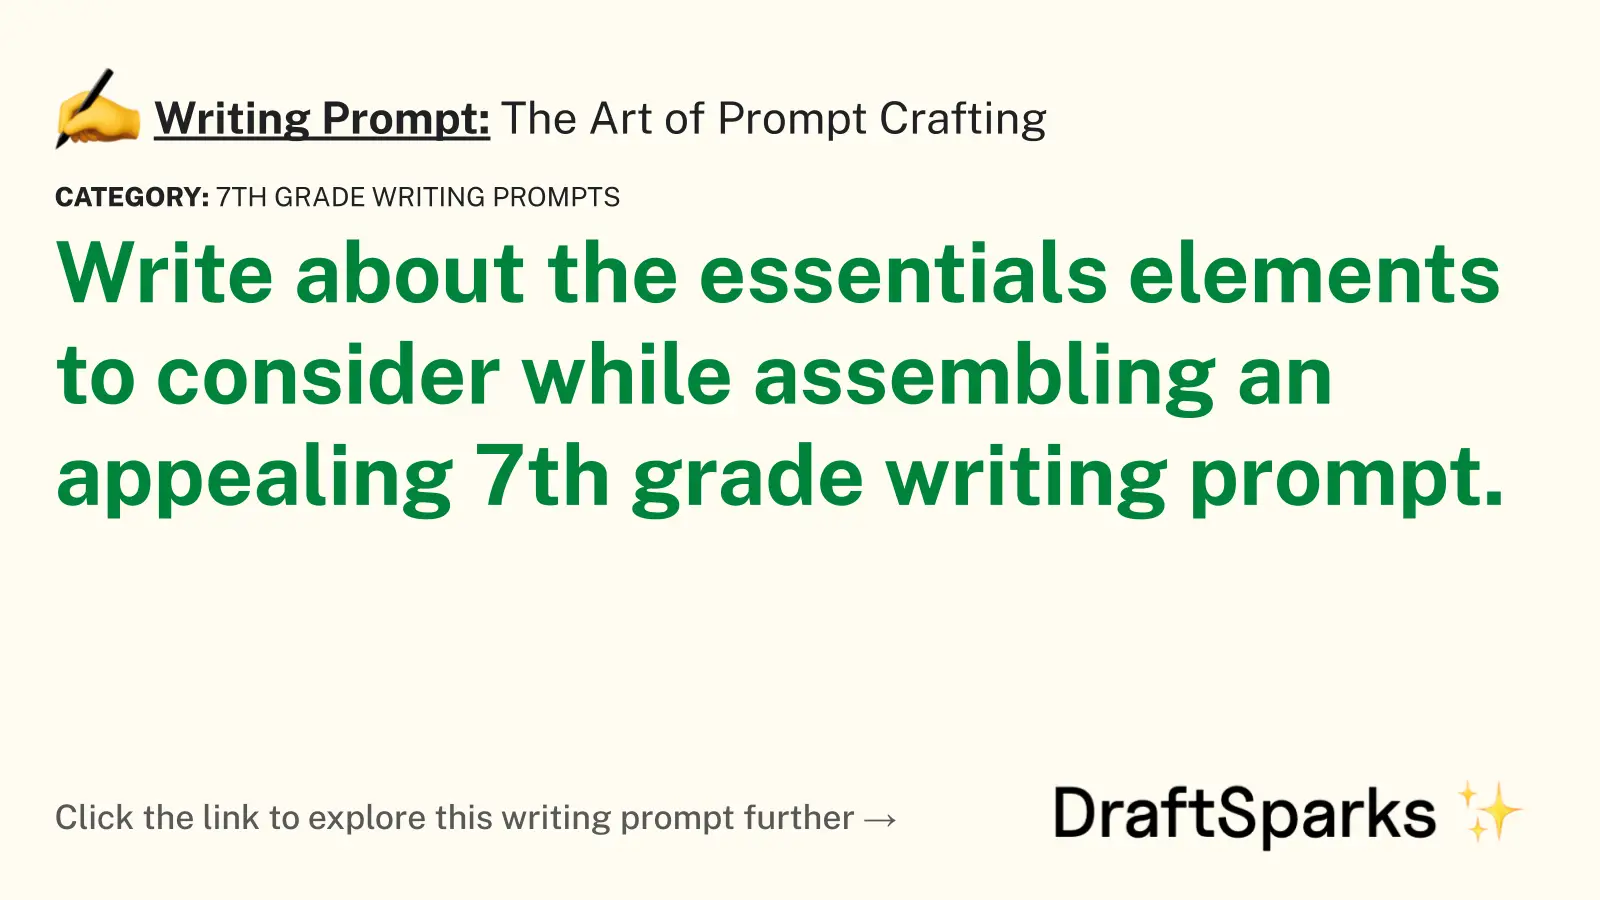 The Art of Prompt Crafting